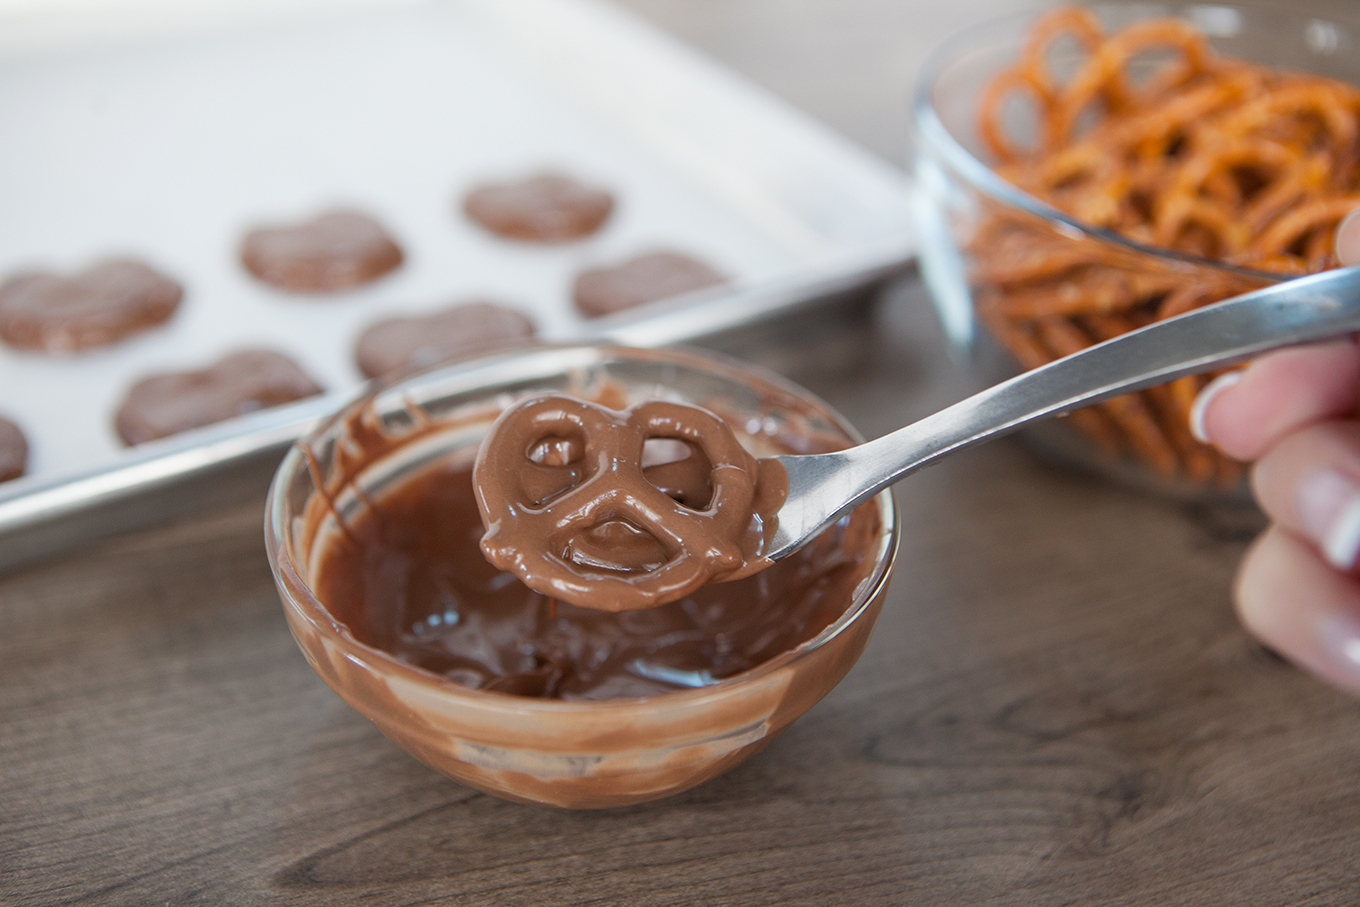 A cute and delicious treat to make with the kids this holiday season, these chocolate covered reindeer pretzels can be put together in no time at all!